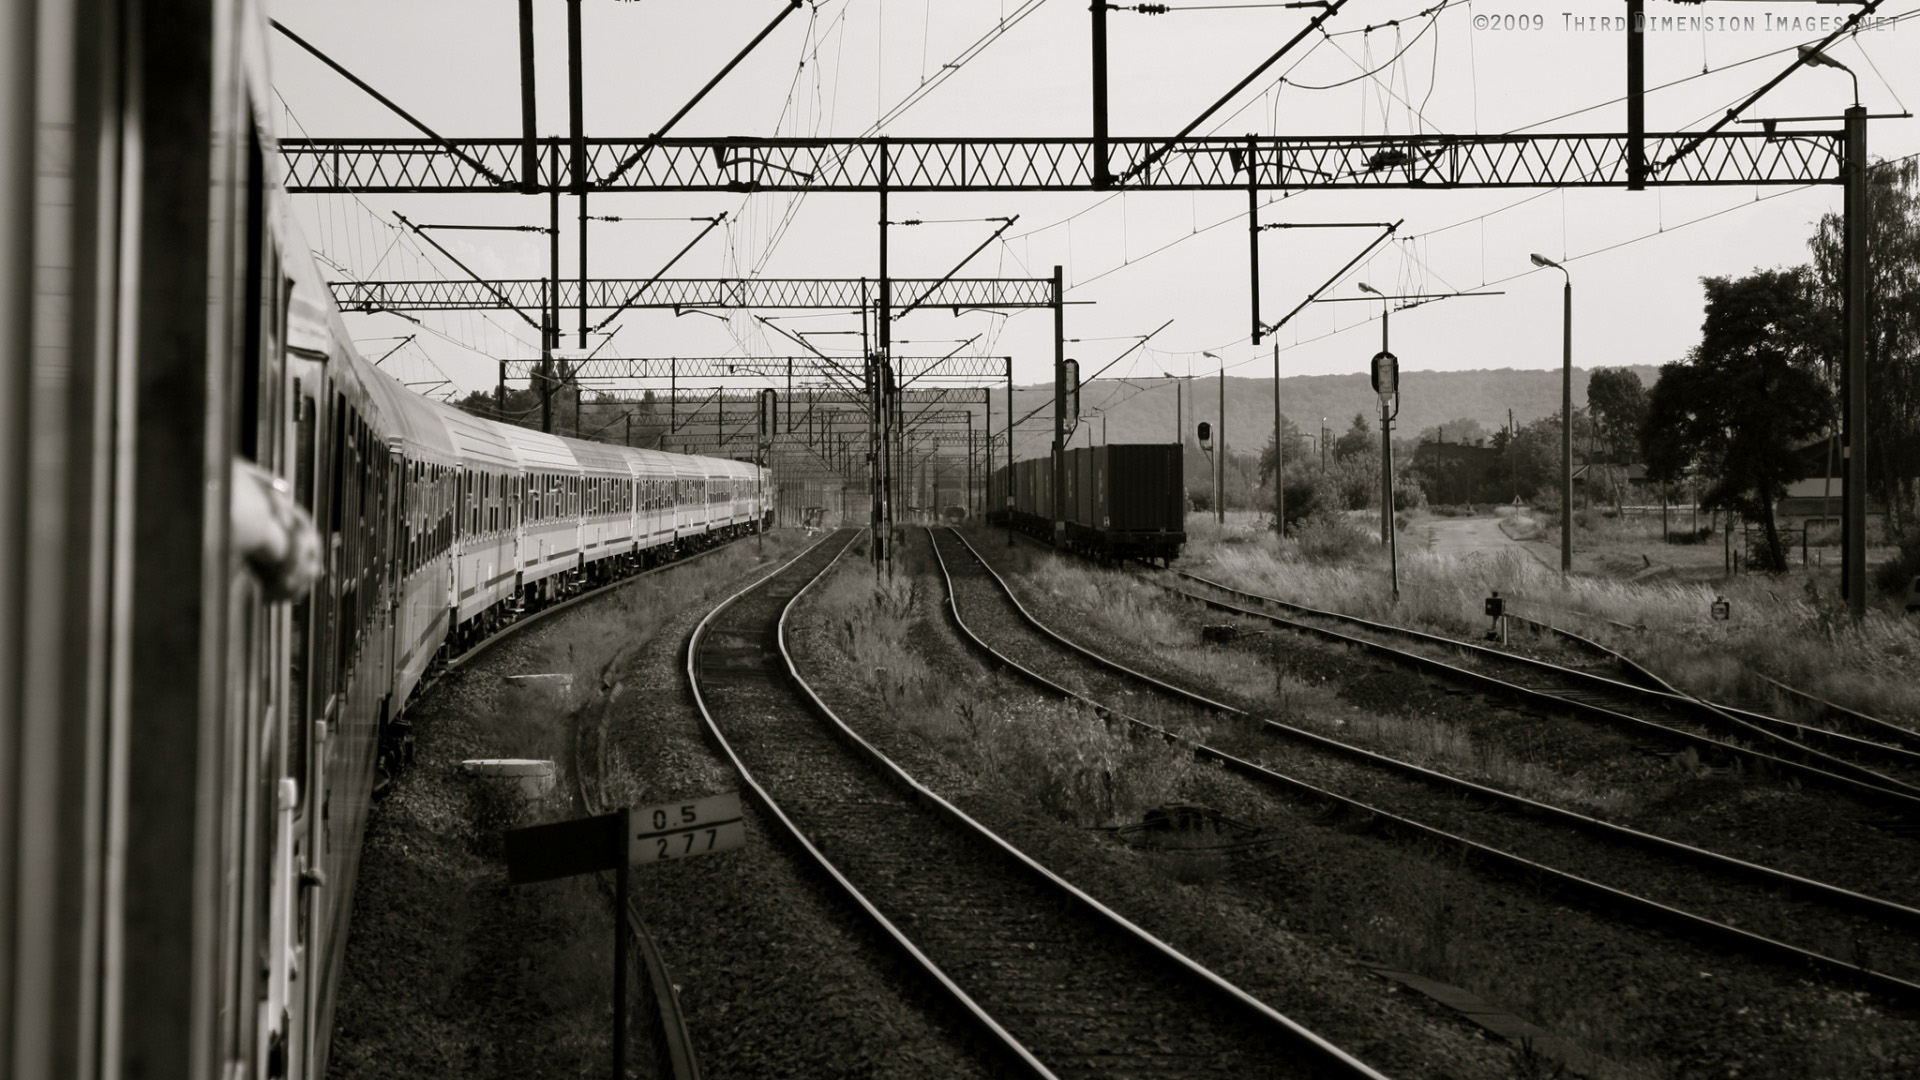 Trains Grayscale Wallpaper Trains, Grayscale, Railroad - 1920 X 1080 , HD Wallpaper & Backgrounds